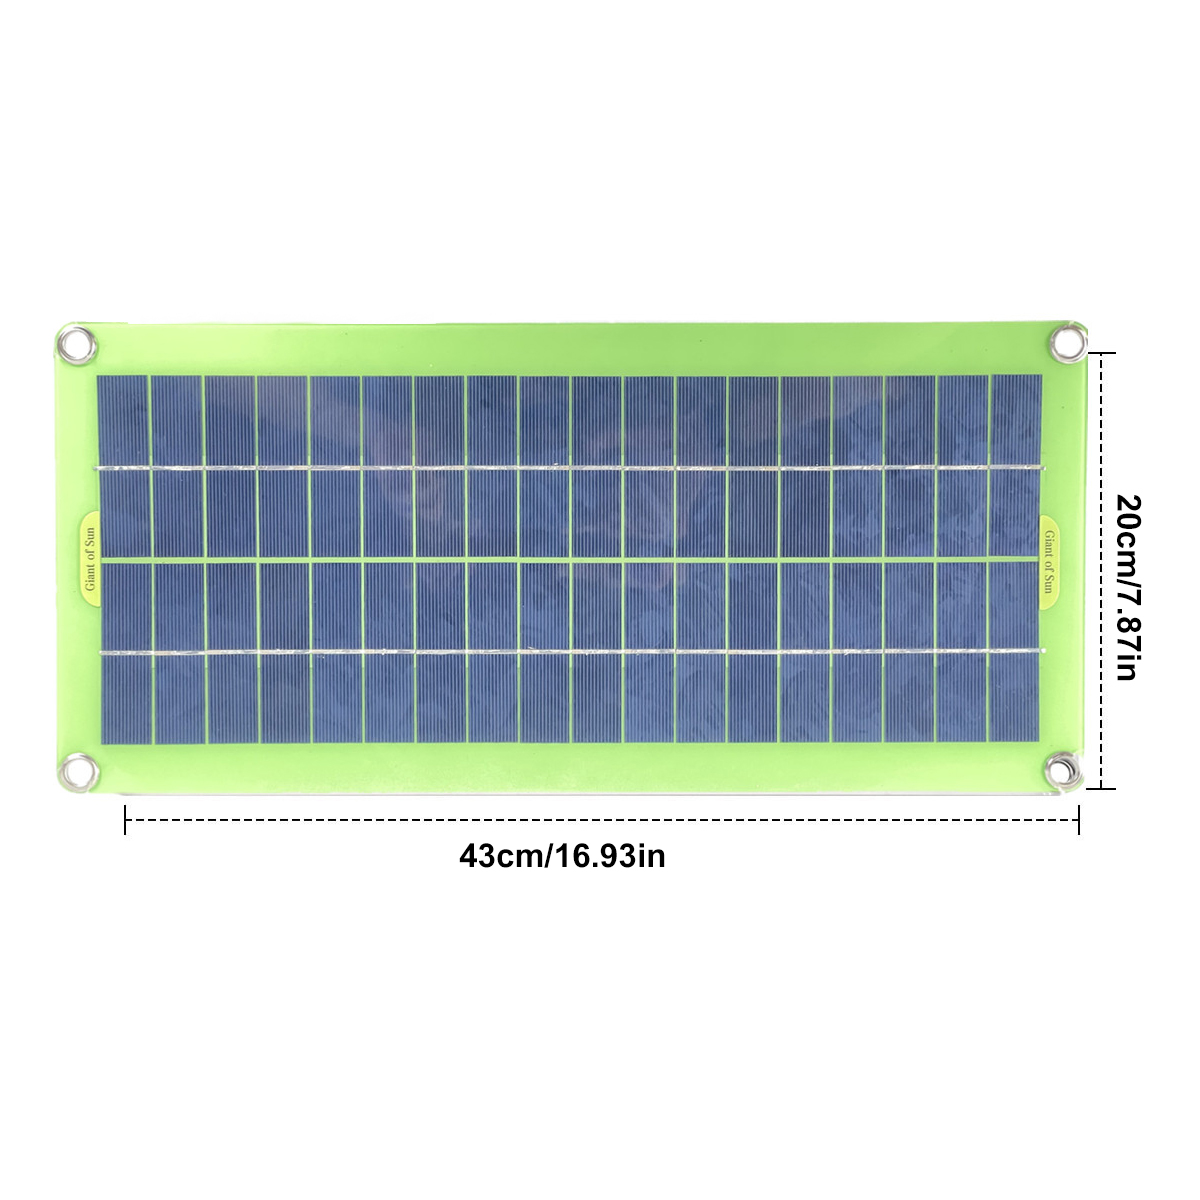 DC-200W-18V-Solar-Panel-Kit-Double-USB-Port-Controller-Power-Bank-Portable-Battery-Charger-for-Outdo-1812074-5